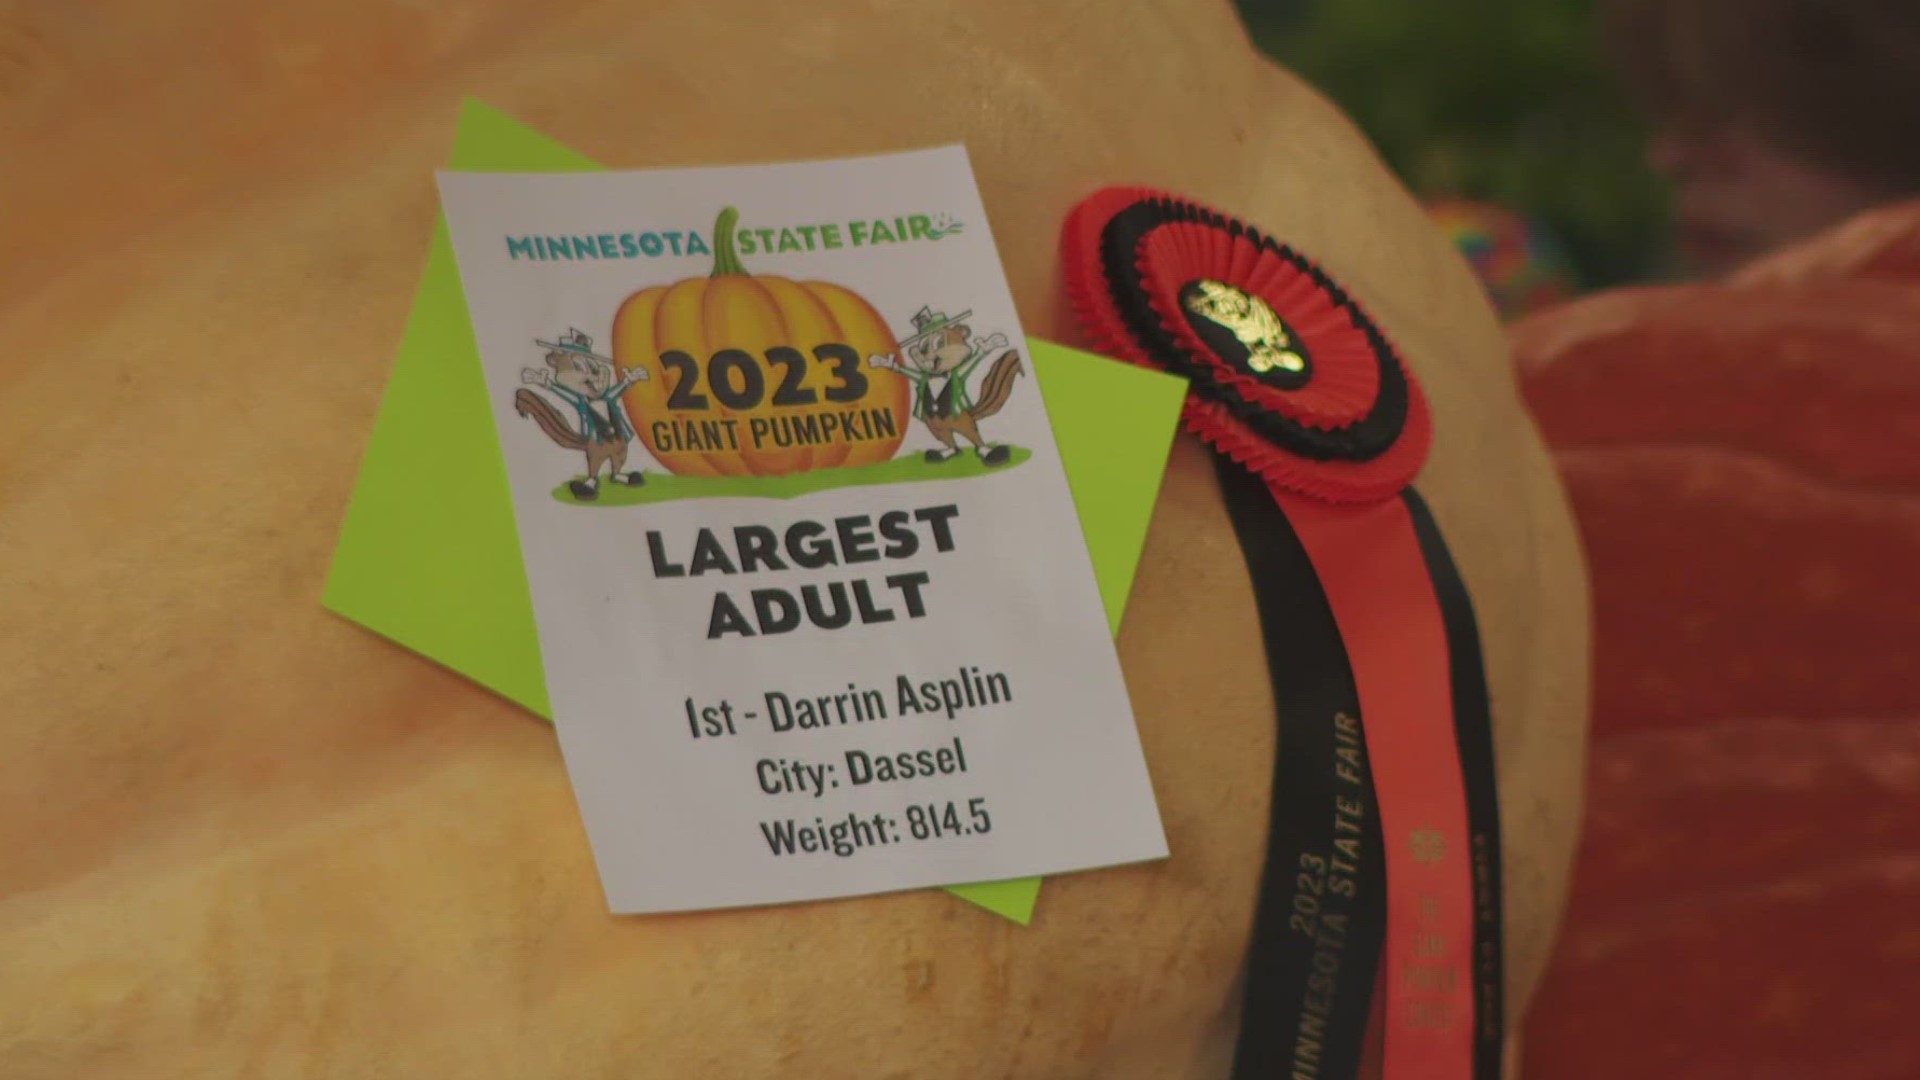 The 814.5-pound gargantuan gourd, grown by Darrin Asplin, was nearly 40 pounds heavier than the second-place finisher.